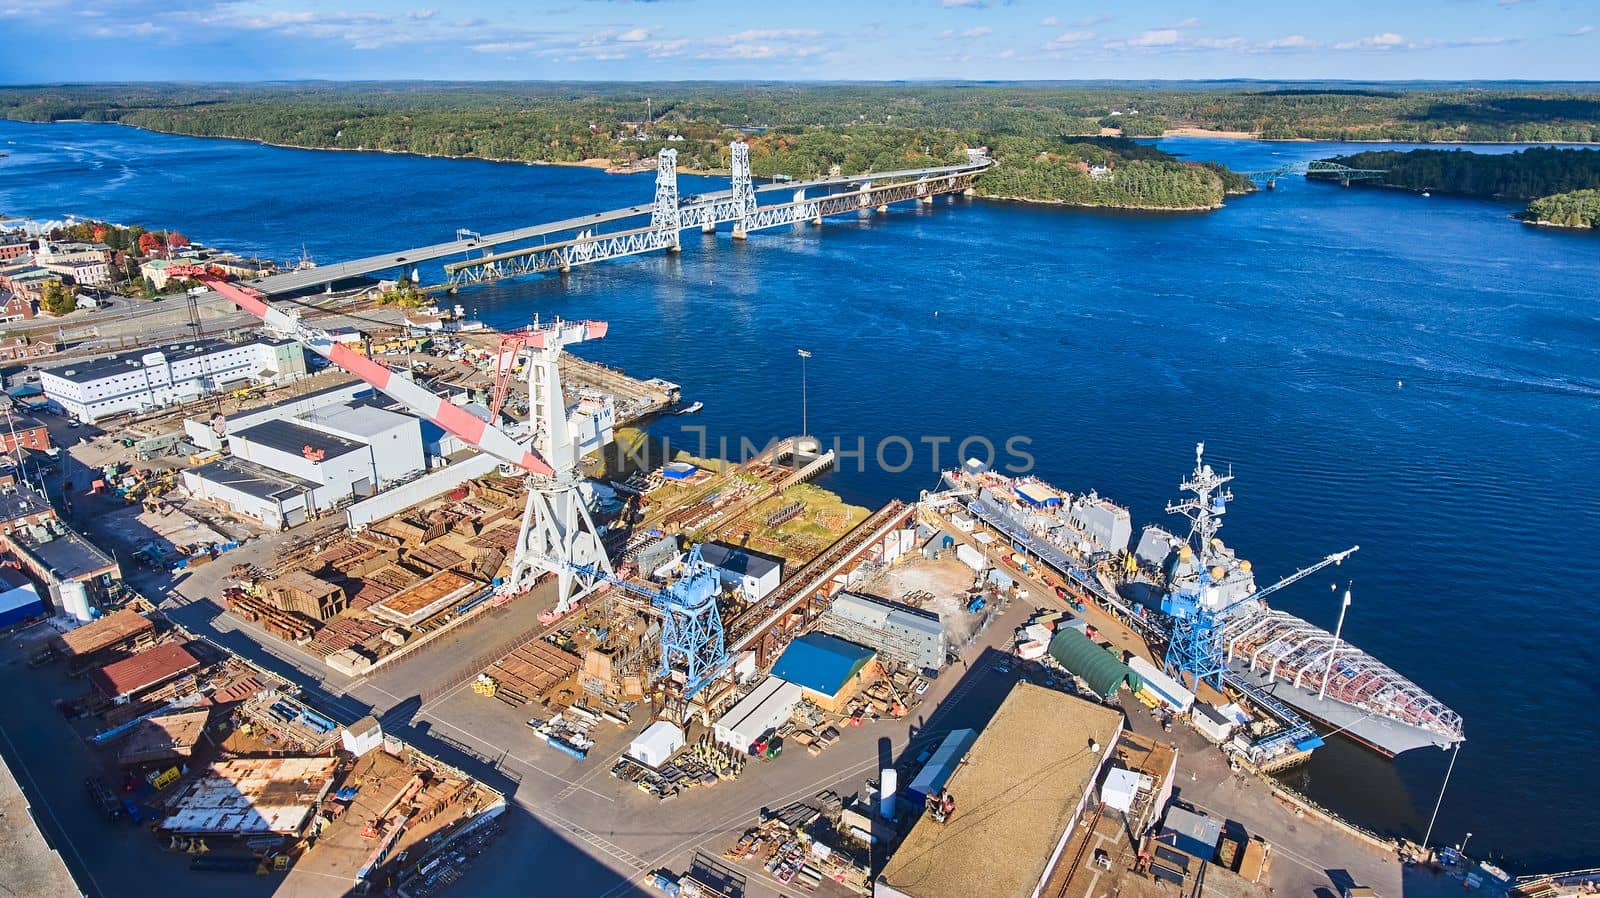 Huge shipyard on Maine river with lift bridge and ships under construction by njproductions